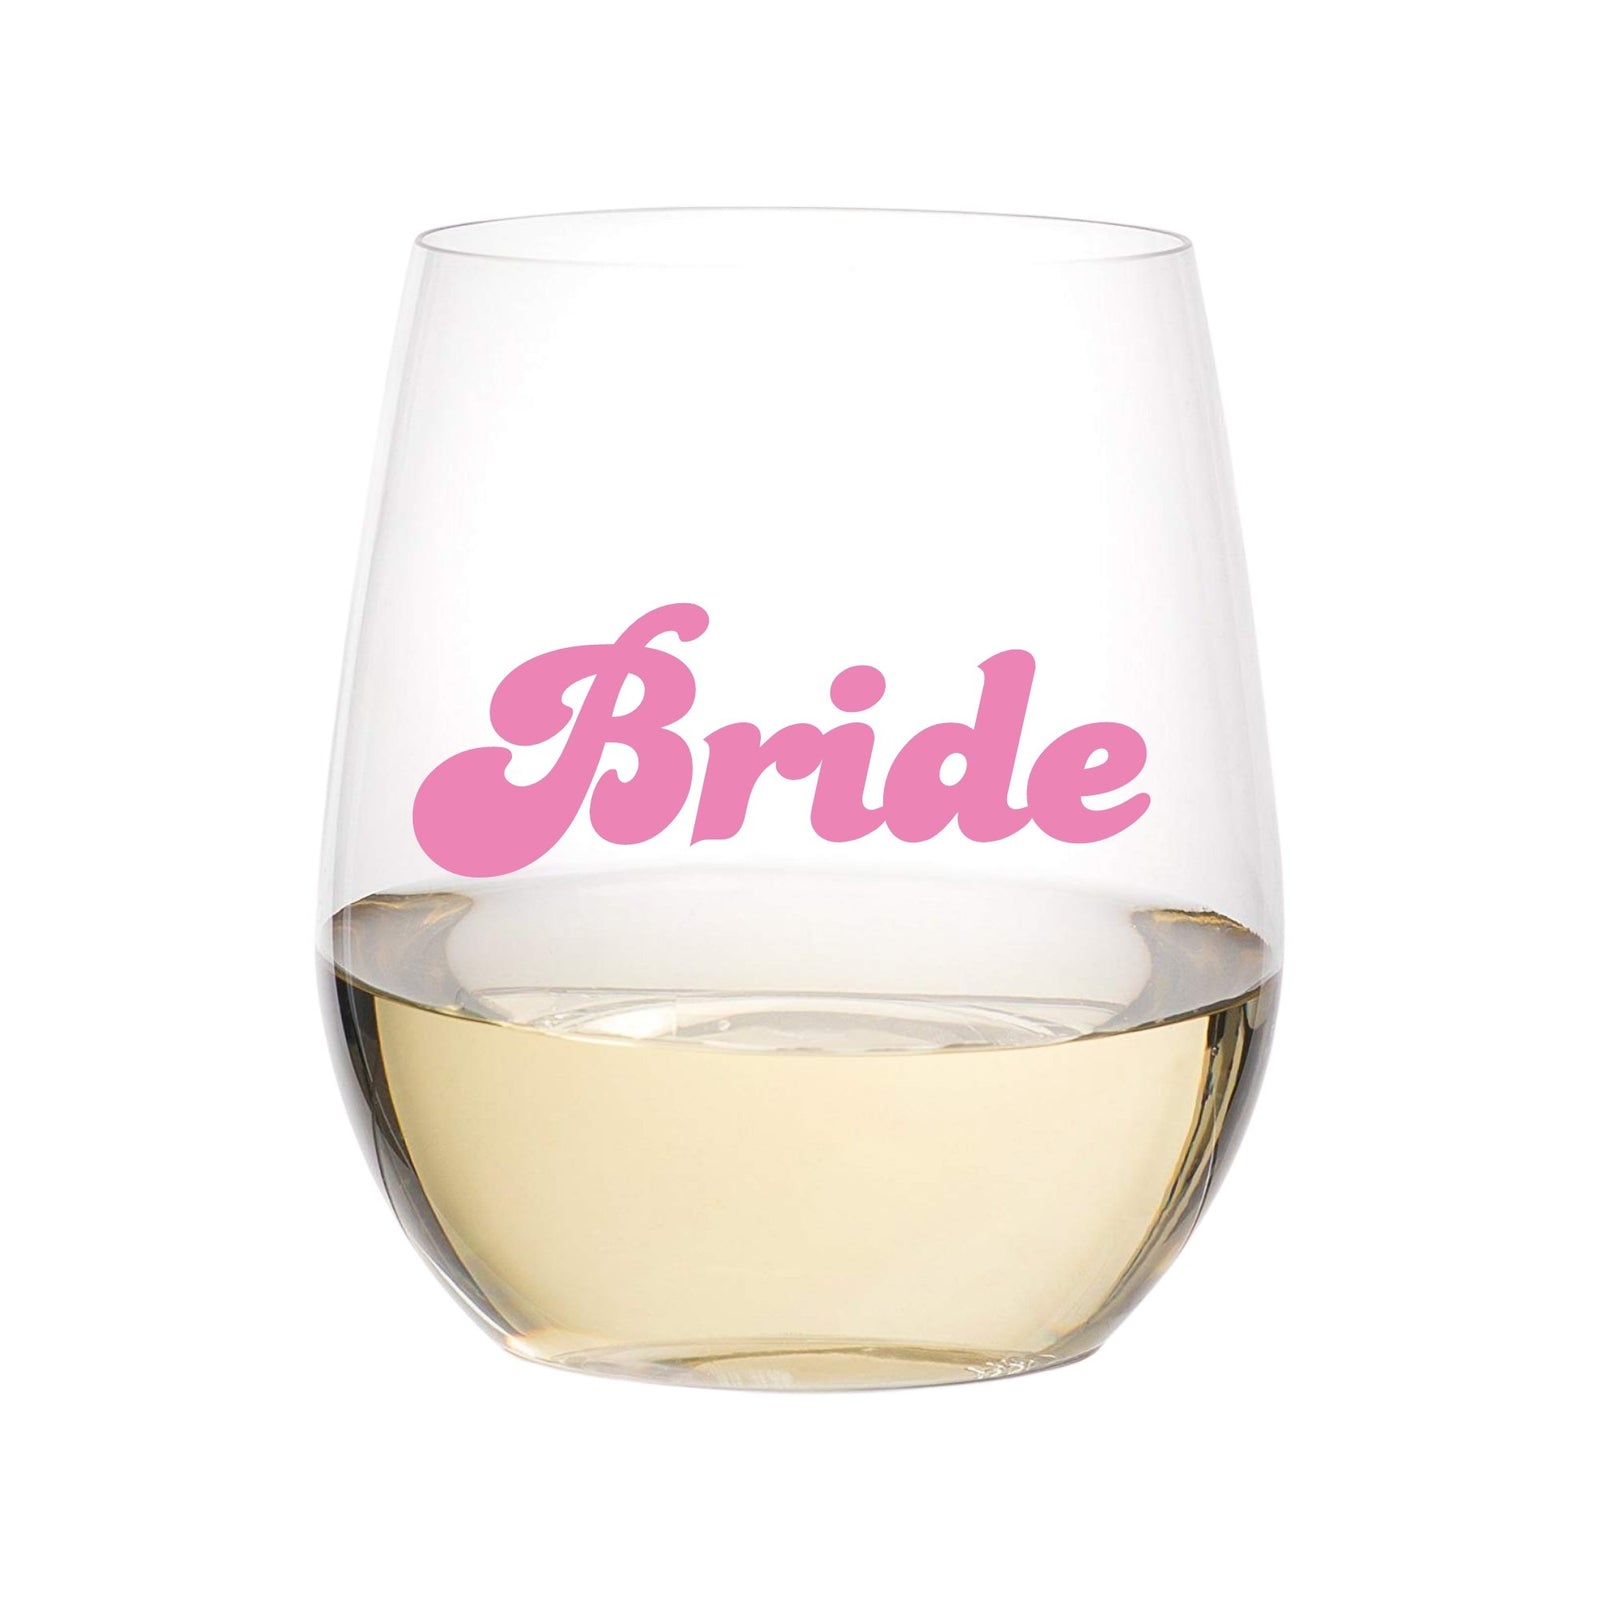 Set of 10 Bachelorette Party Silicone Wine Cups White Bride & Rose Gold  Bride Tribe Cups, Bridesmaid Wedding Gift Party Favors